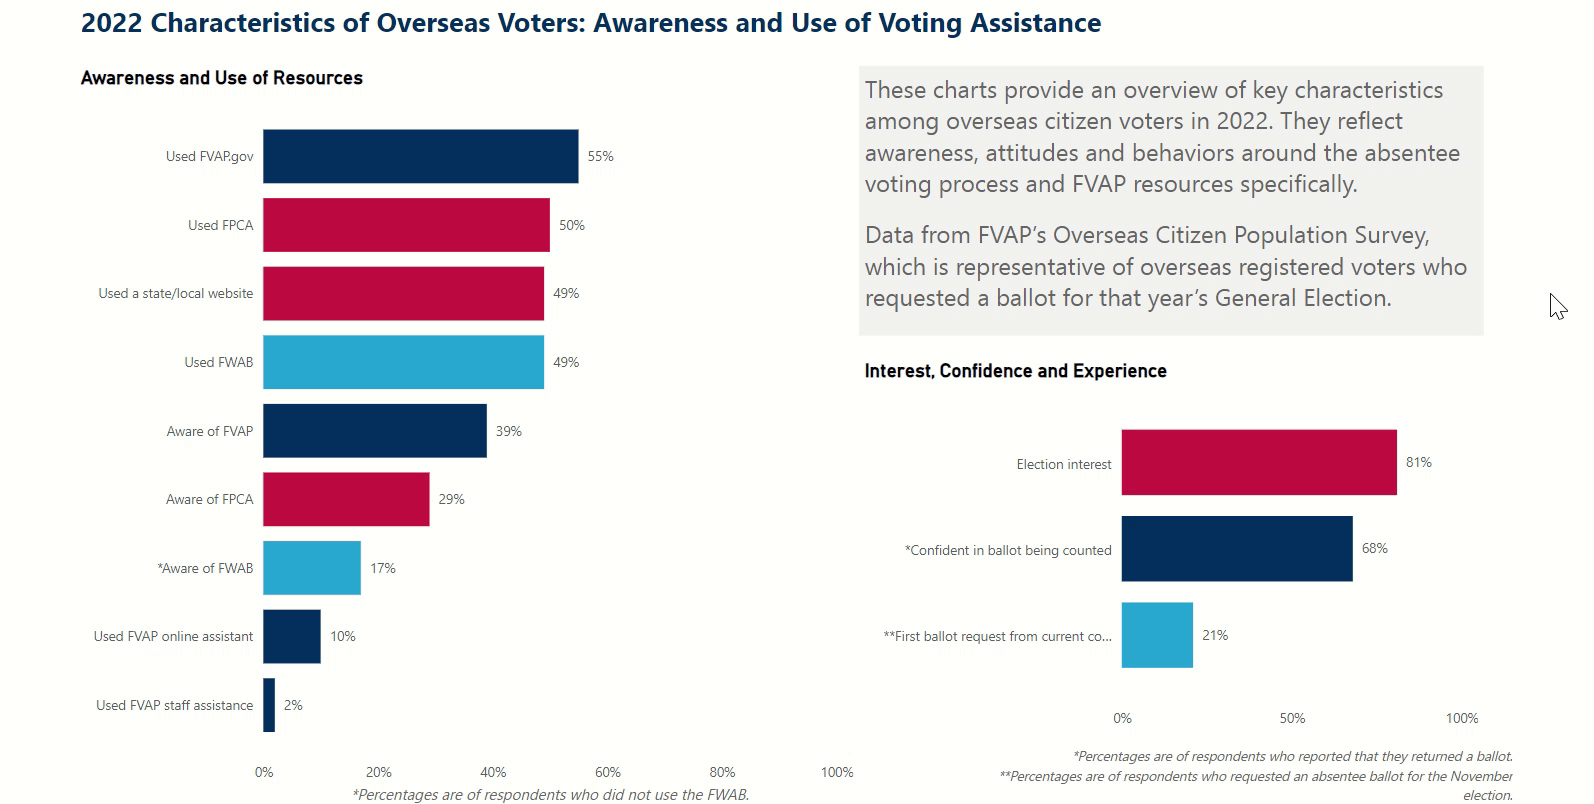 Image Characteristics of Overseas Voters - Awareness Use of Voting Resources